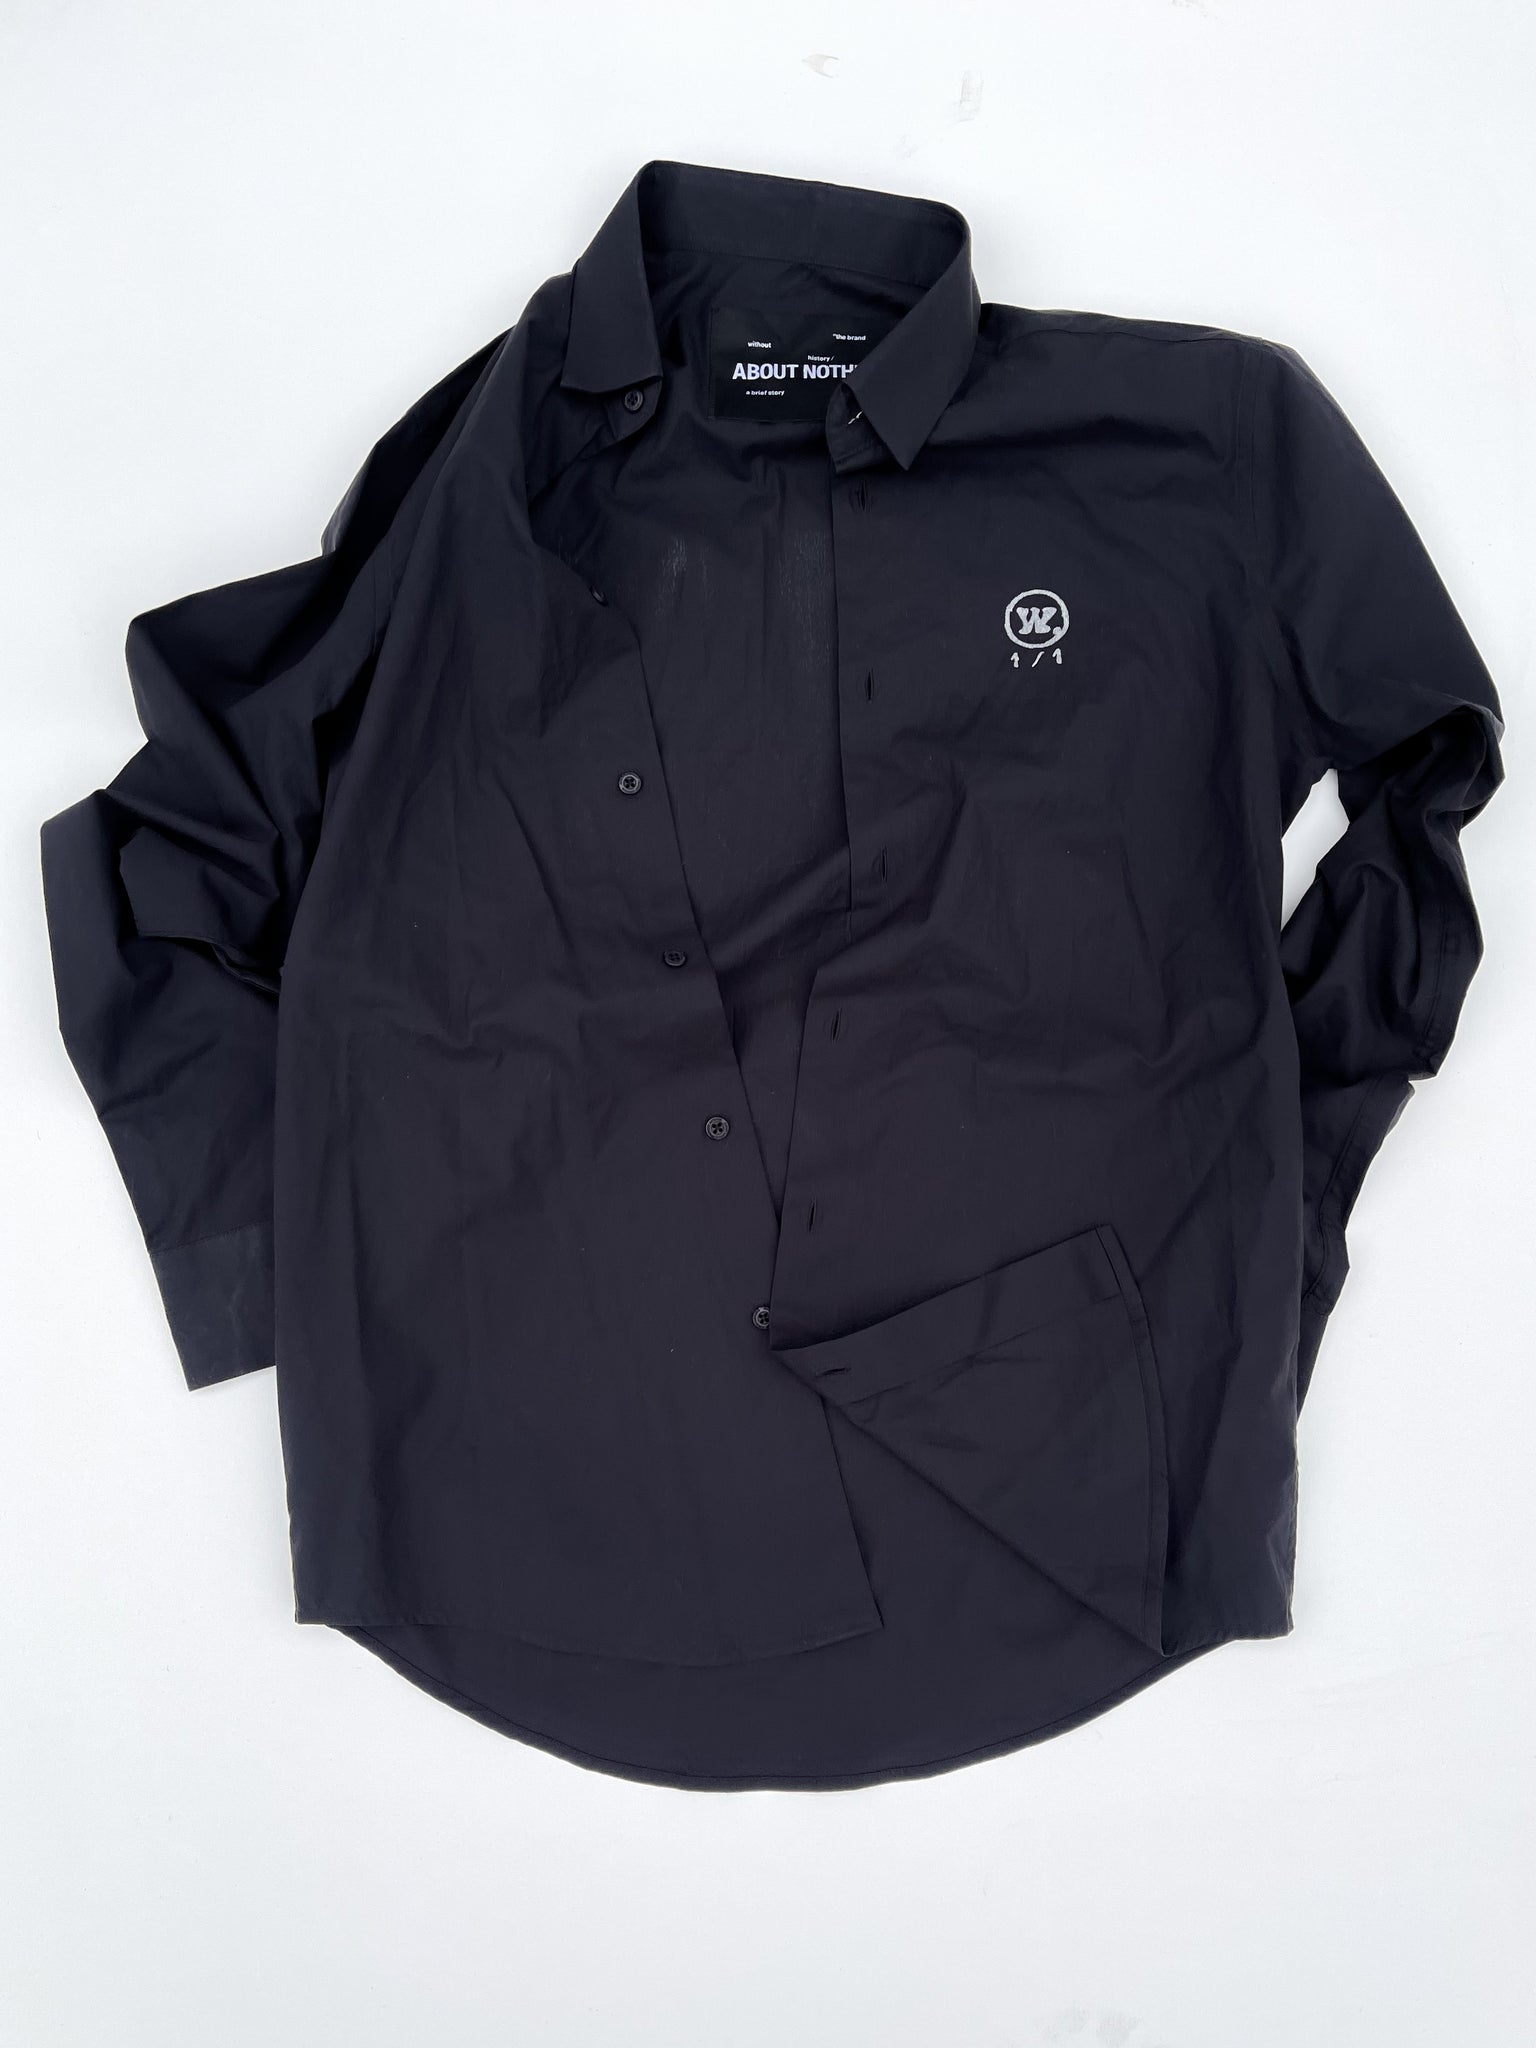 WORLDXIT x ABOUT NOTHING // 1 OF 1 ROCKSPORT SHIRT D.01 [SMALL]